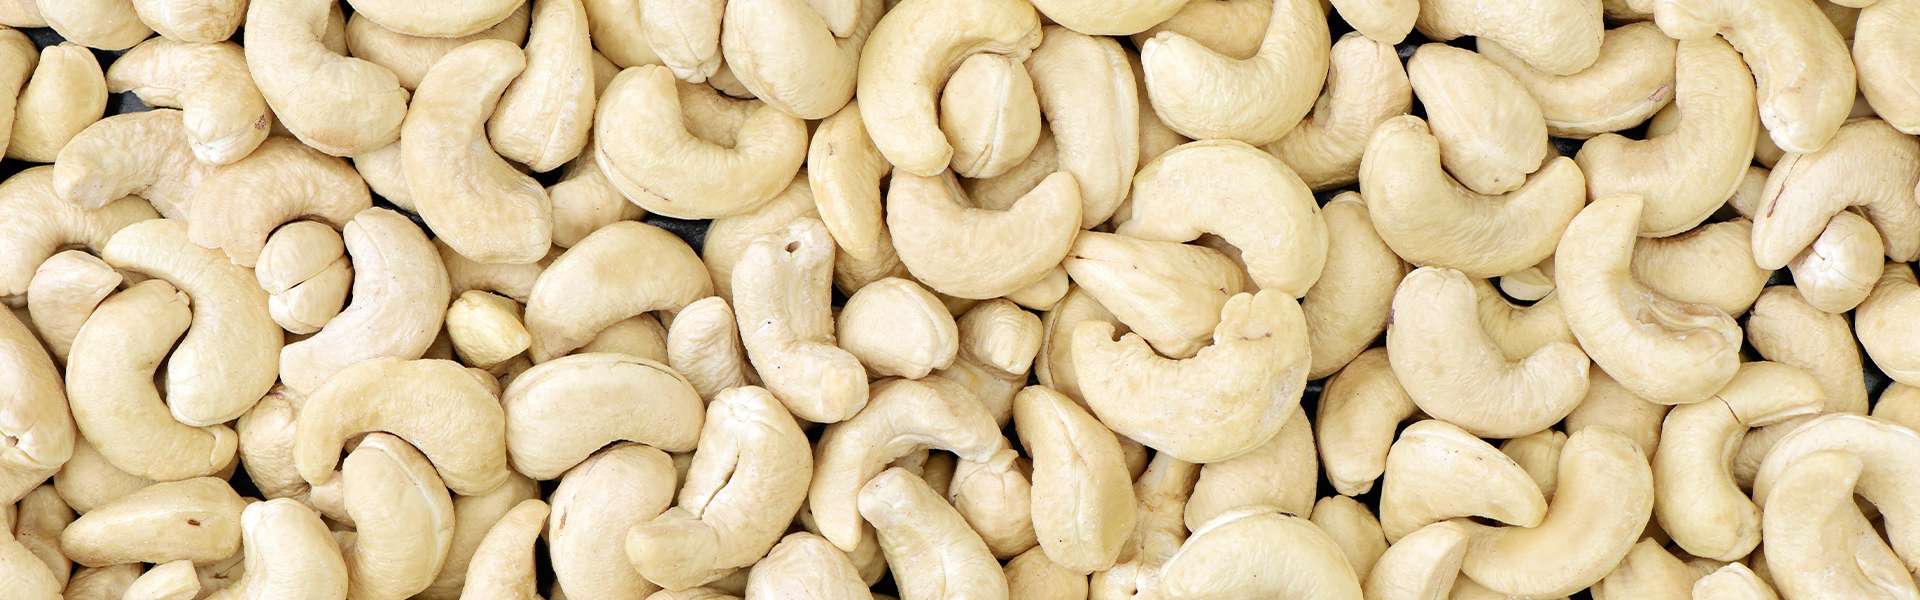 Organic Cashew Cream | Guide to all the benefits, calories, nutrients